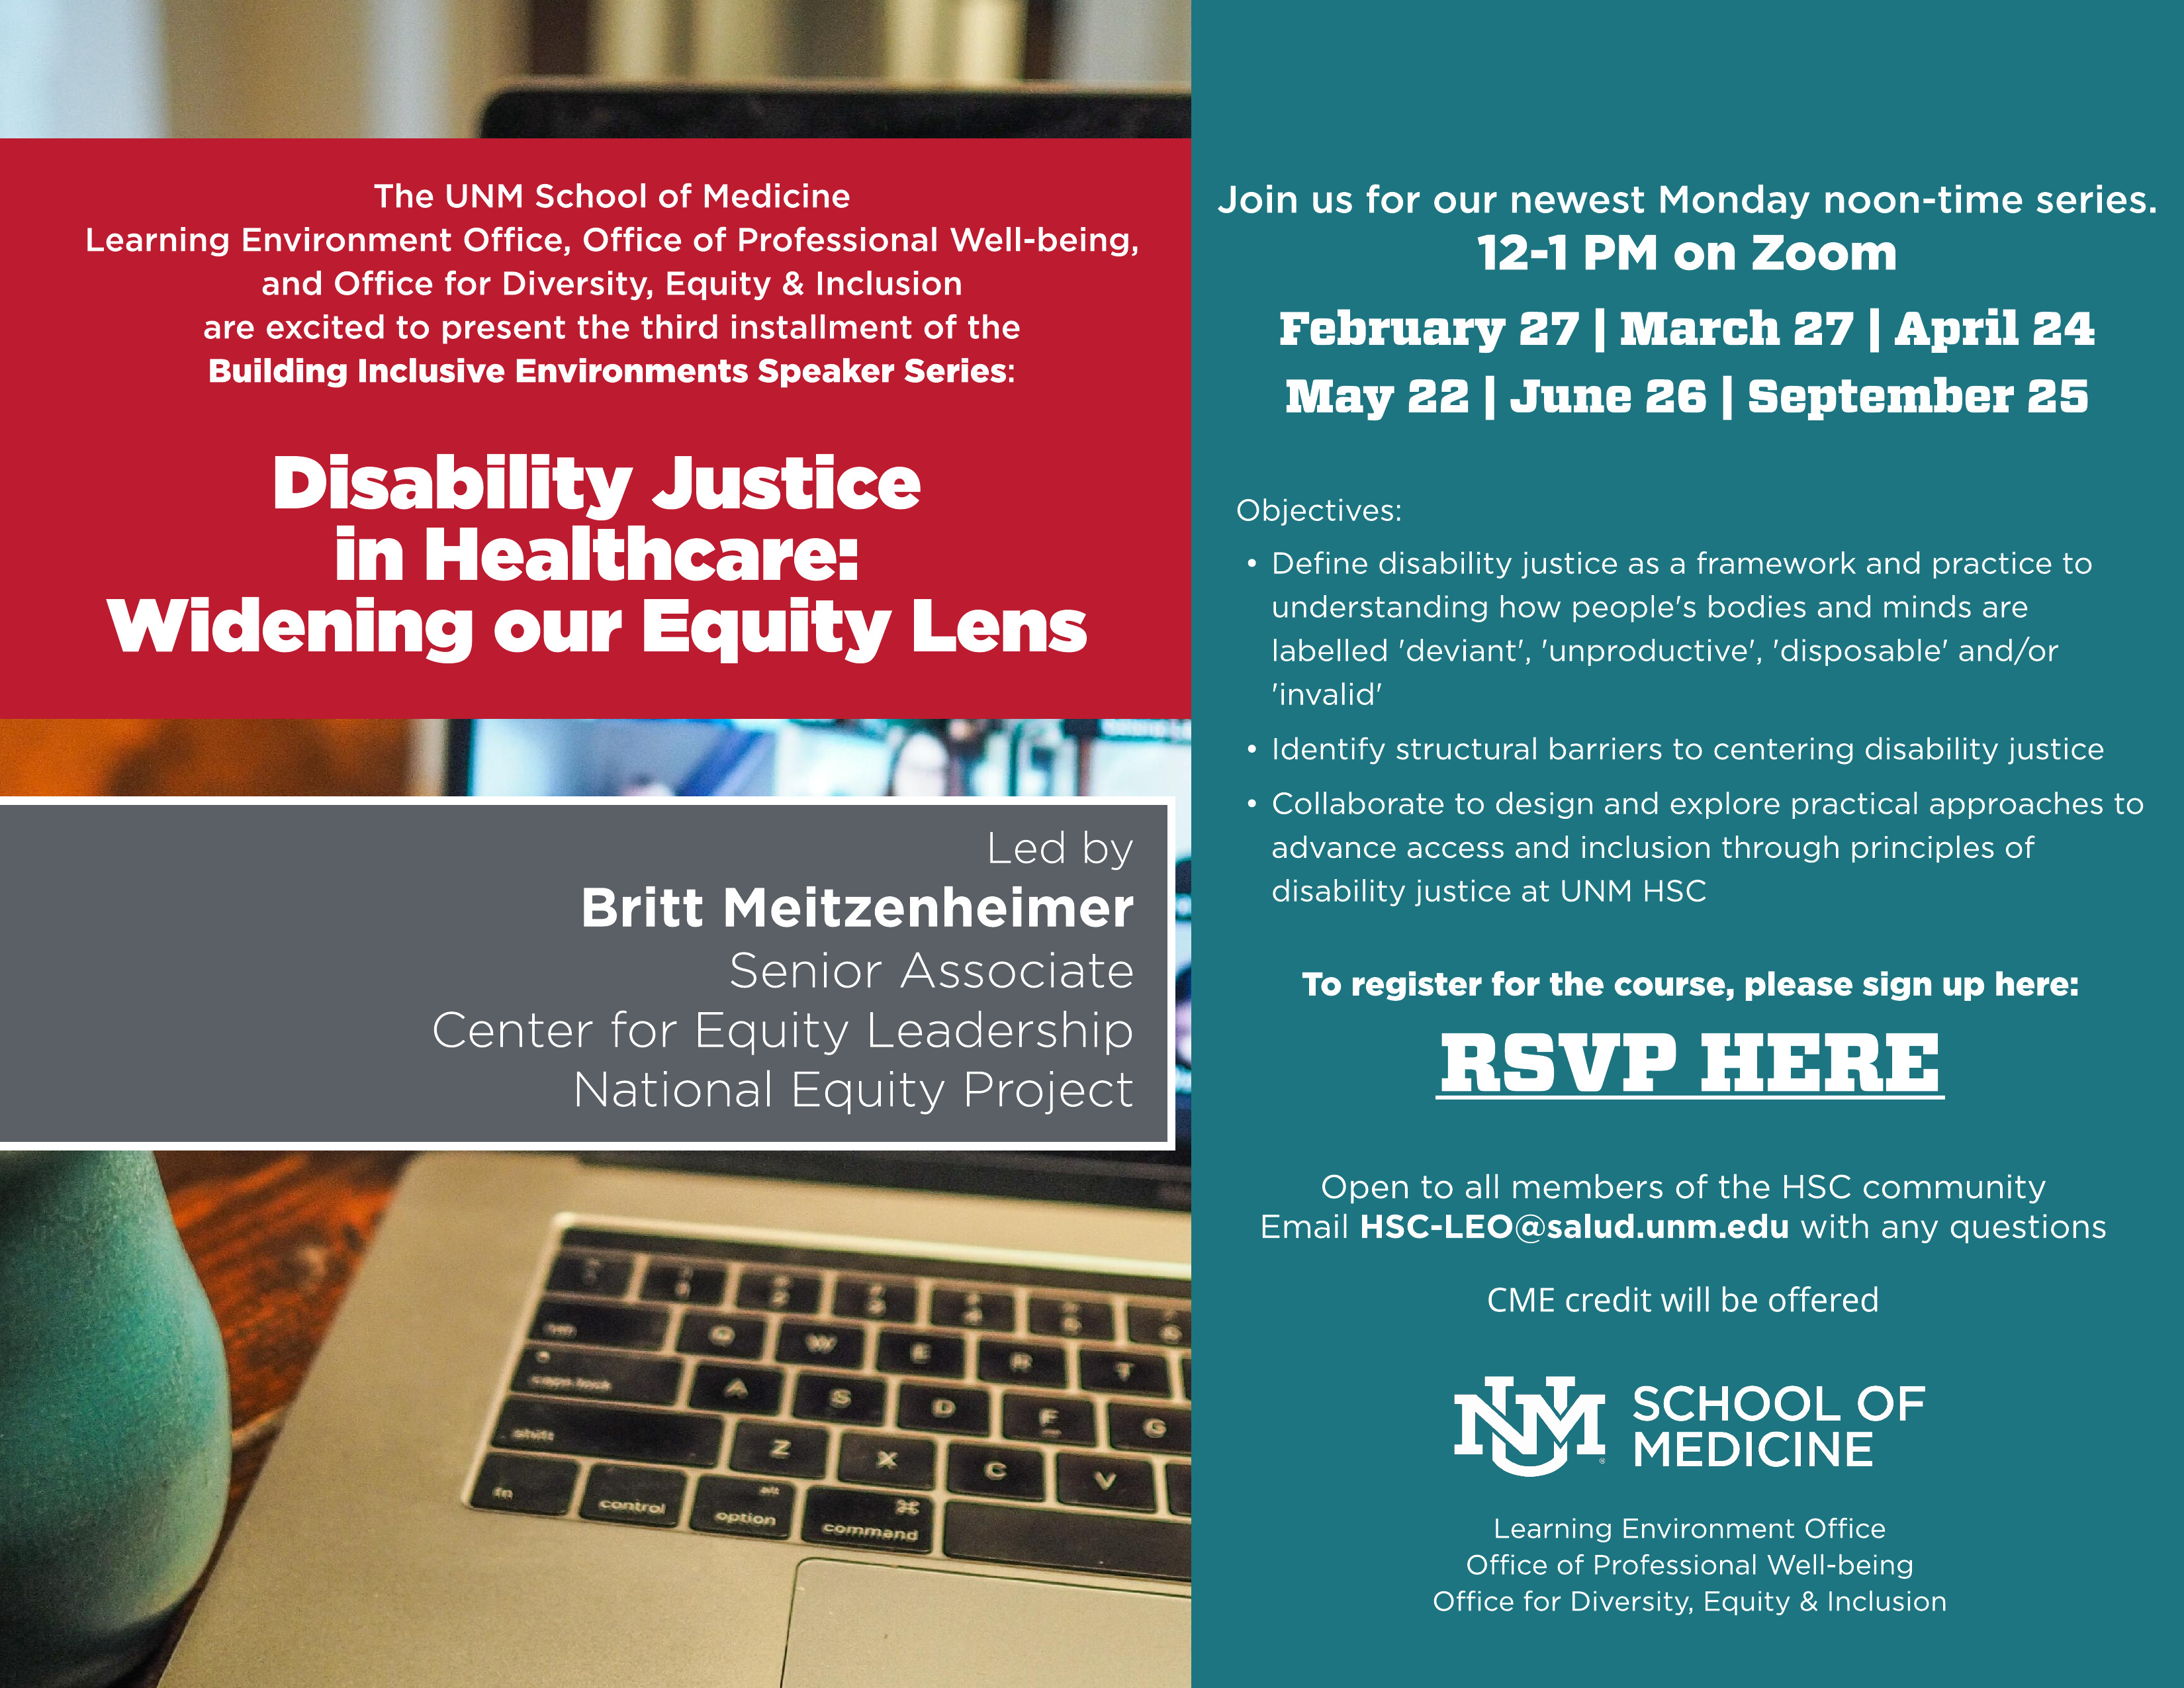 Building Inclusive Environments - Disability Justice in Healthcare: Widening Our Equity Lens